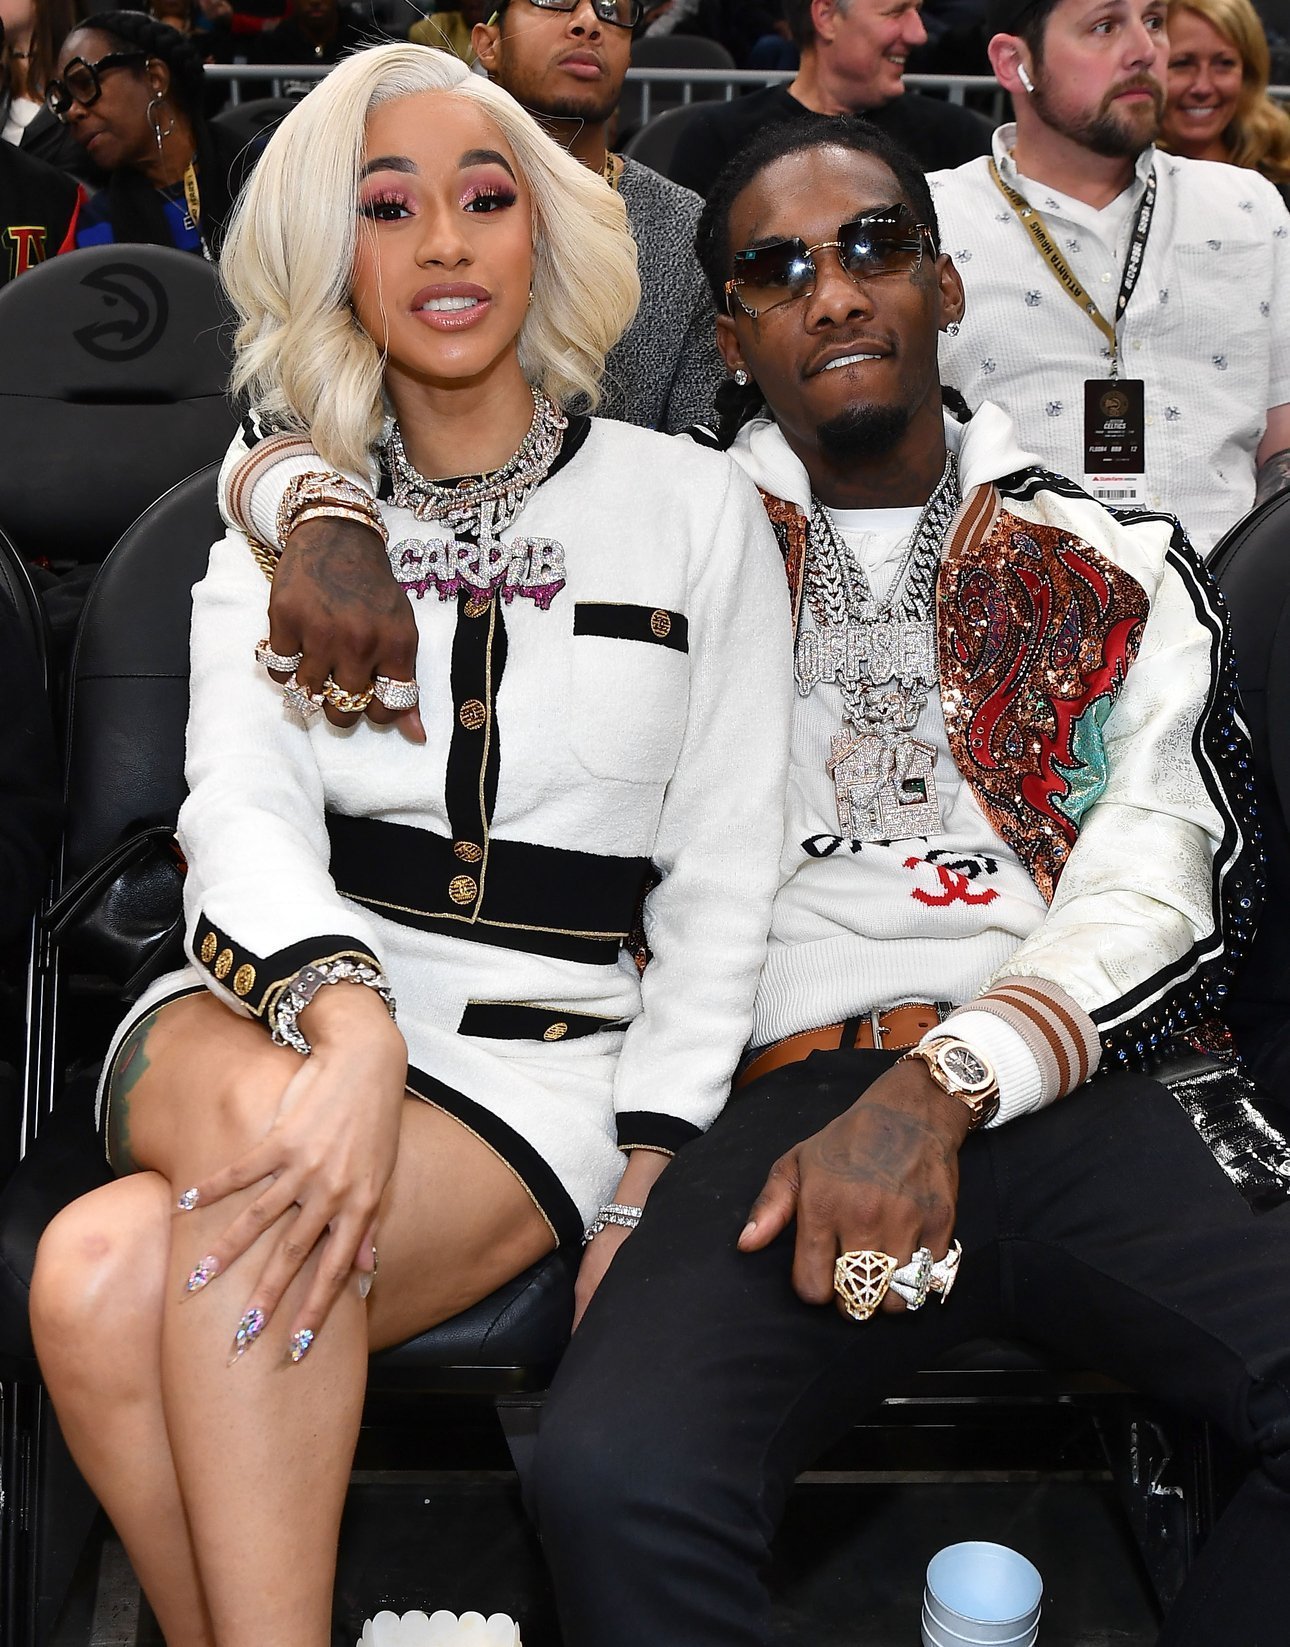 Cardi B and Offset attend the Atlanta Hawks vs Boston Celtics game at State Farm Arena on Nov. 23, 2018 in Atlanta. | Photo: GettyImages/Global Images of Ukraine